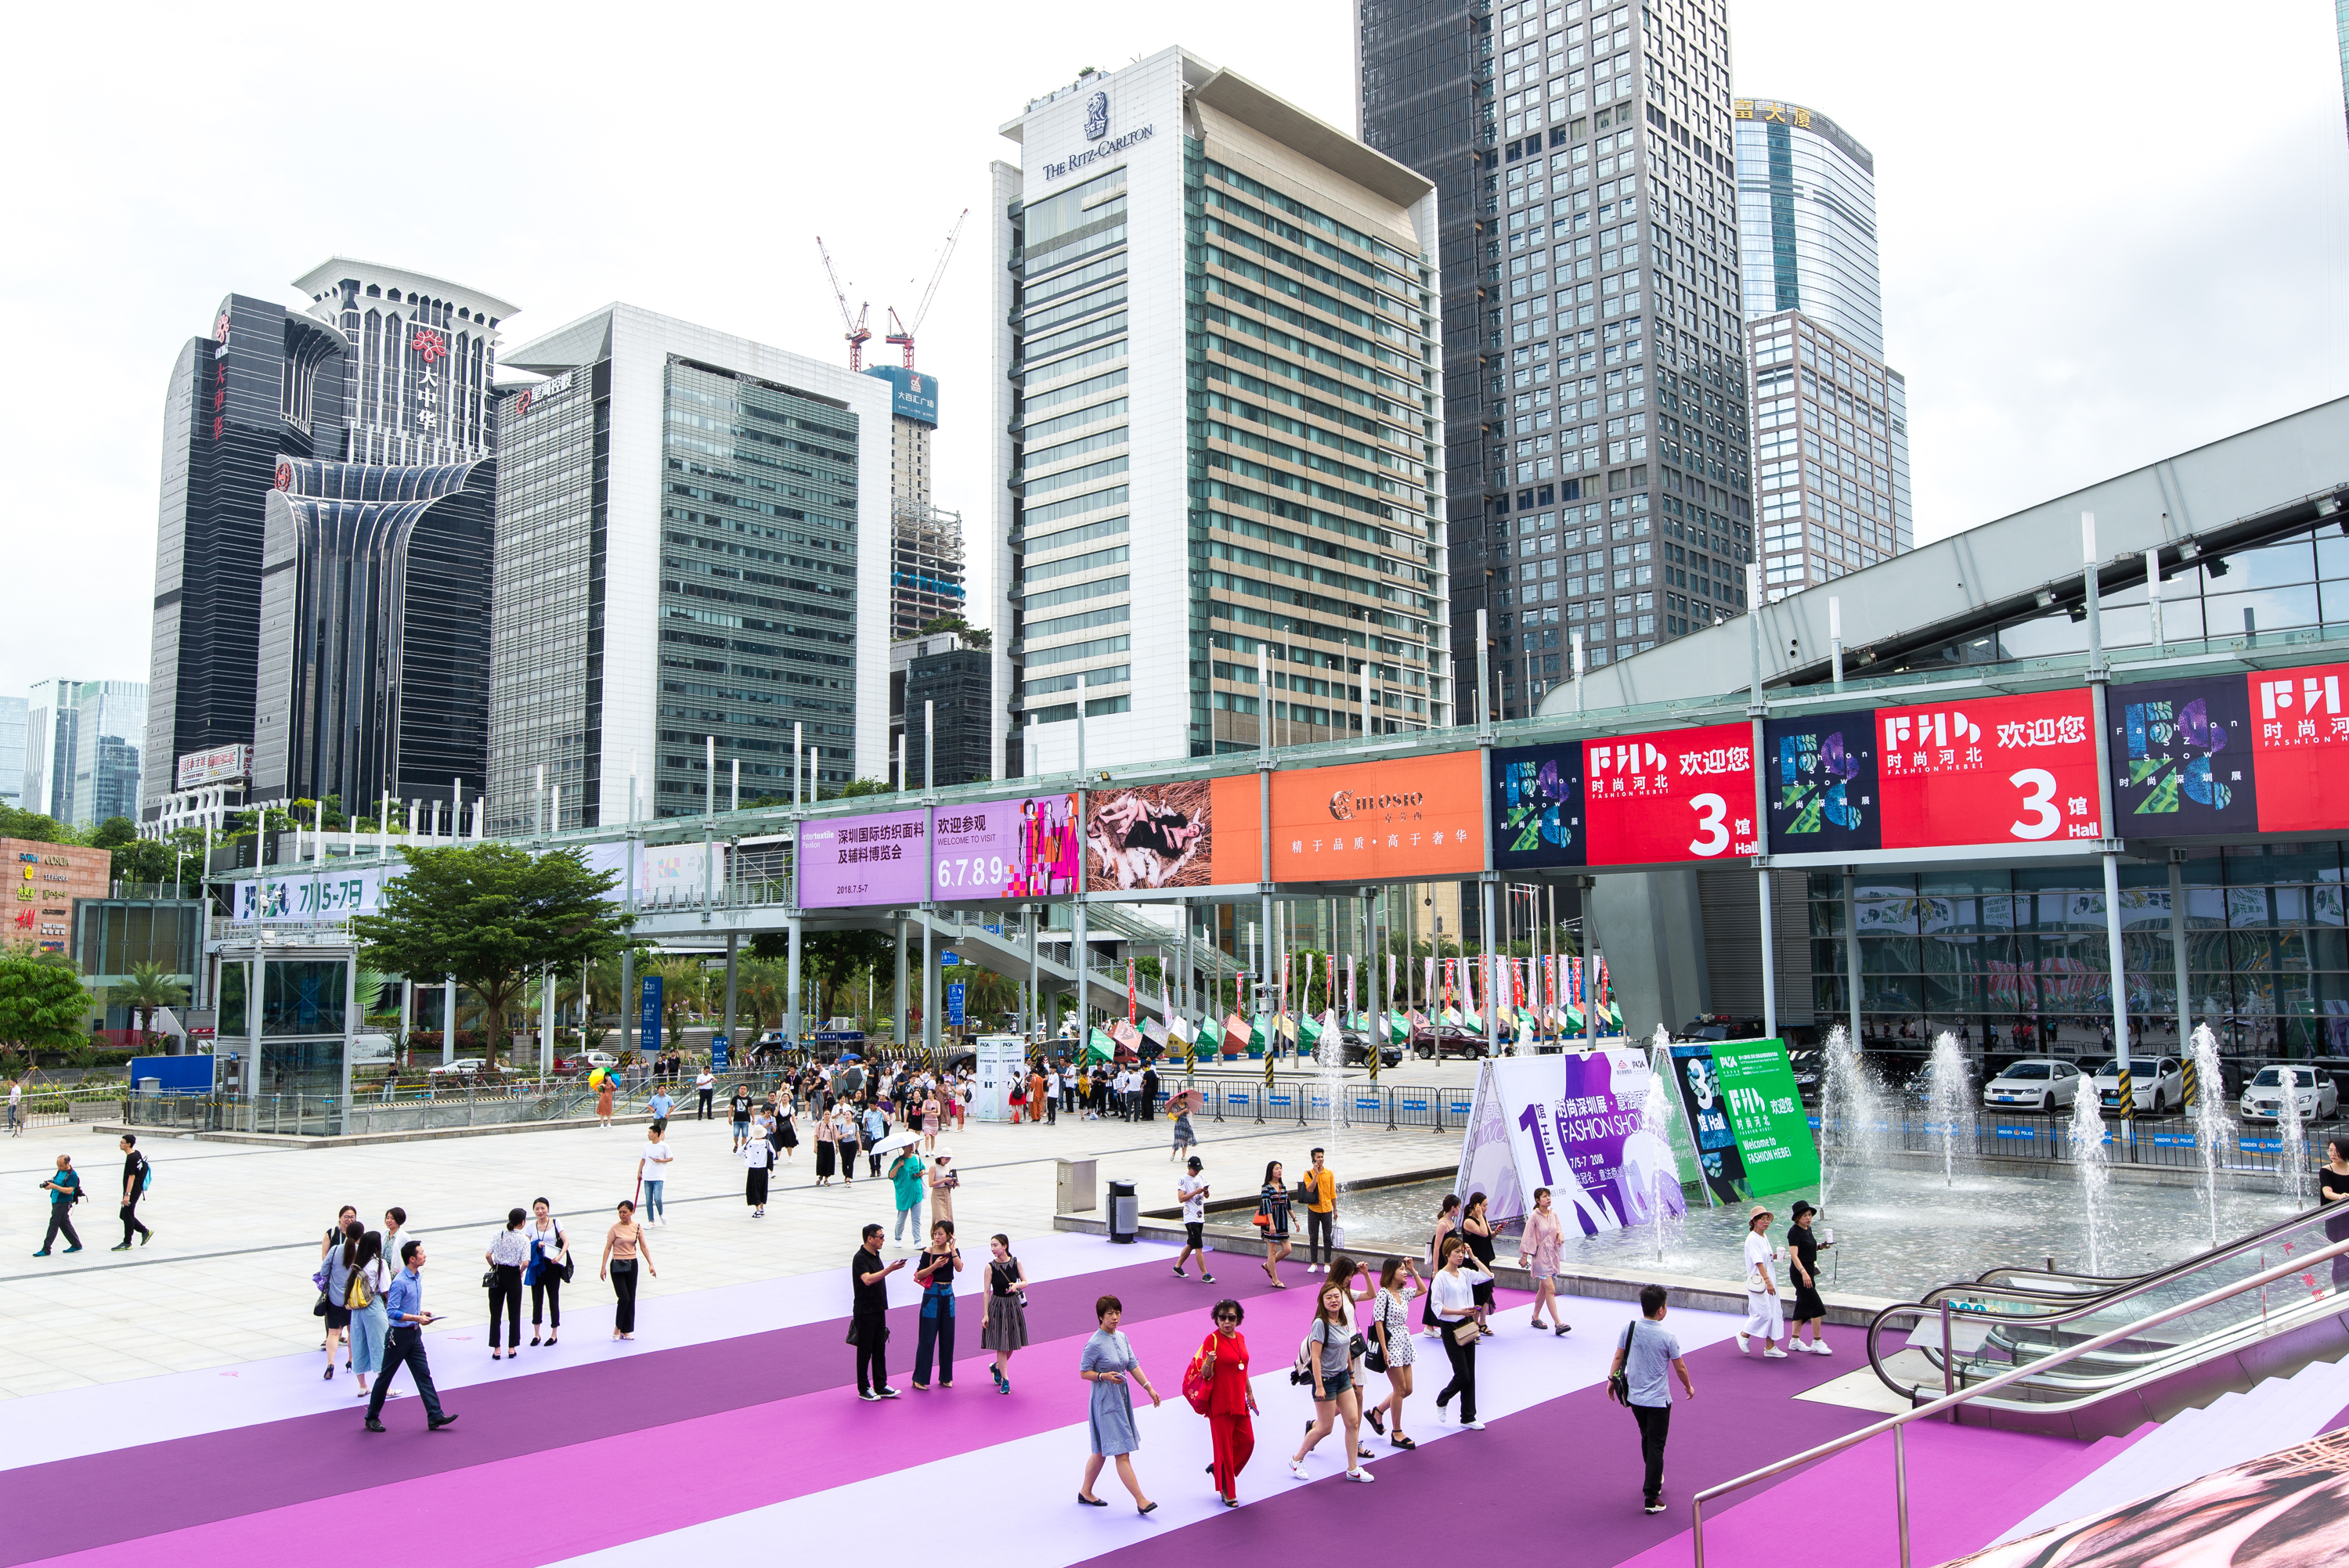 Location is key: Intertextile Pavilion Shenzhen is in China’s fashion capital